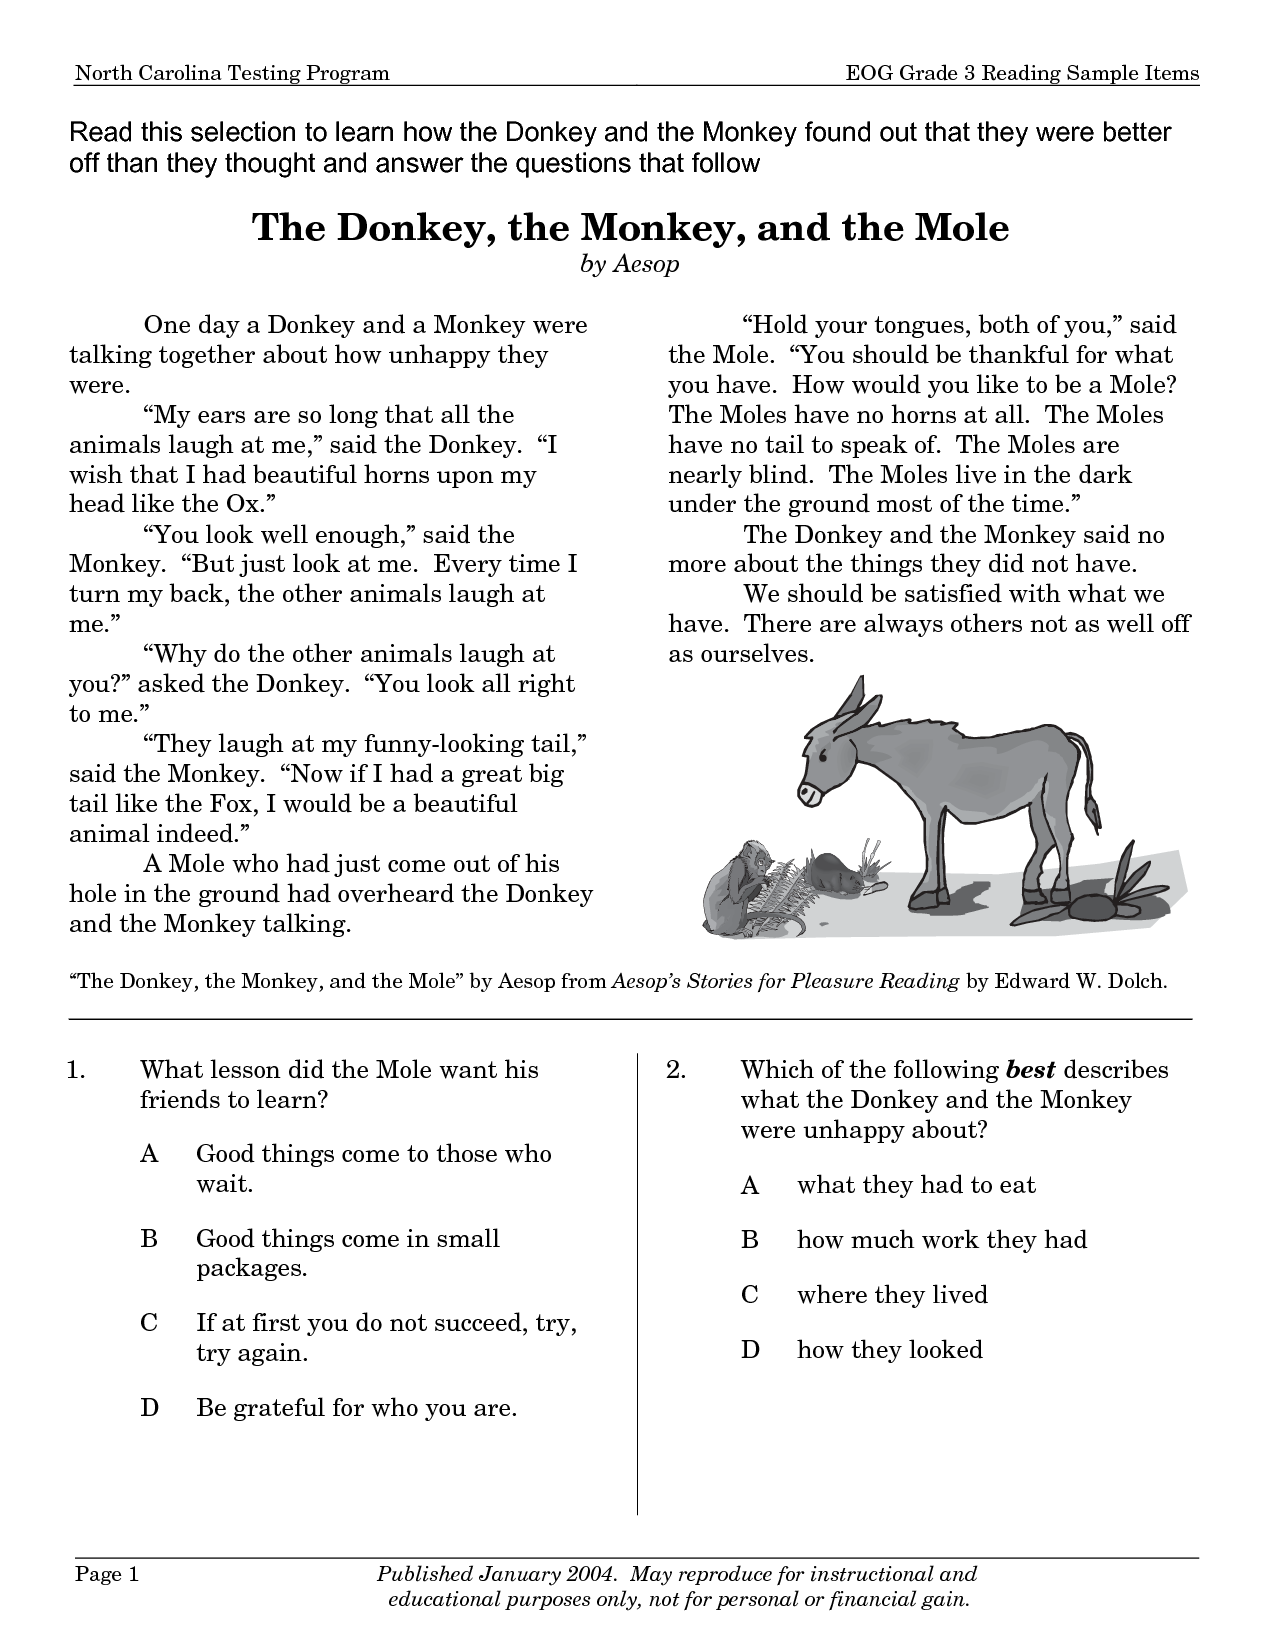 14 Best Images of Accelerated Math Worksheets 3rd Grade - Common Core